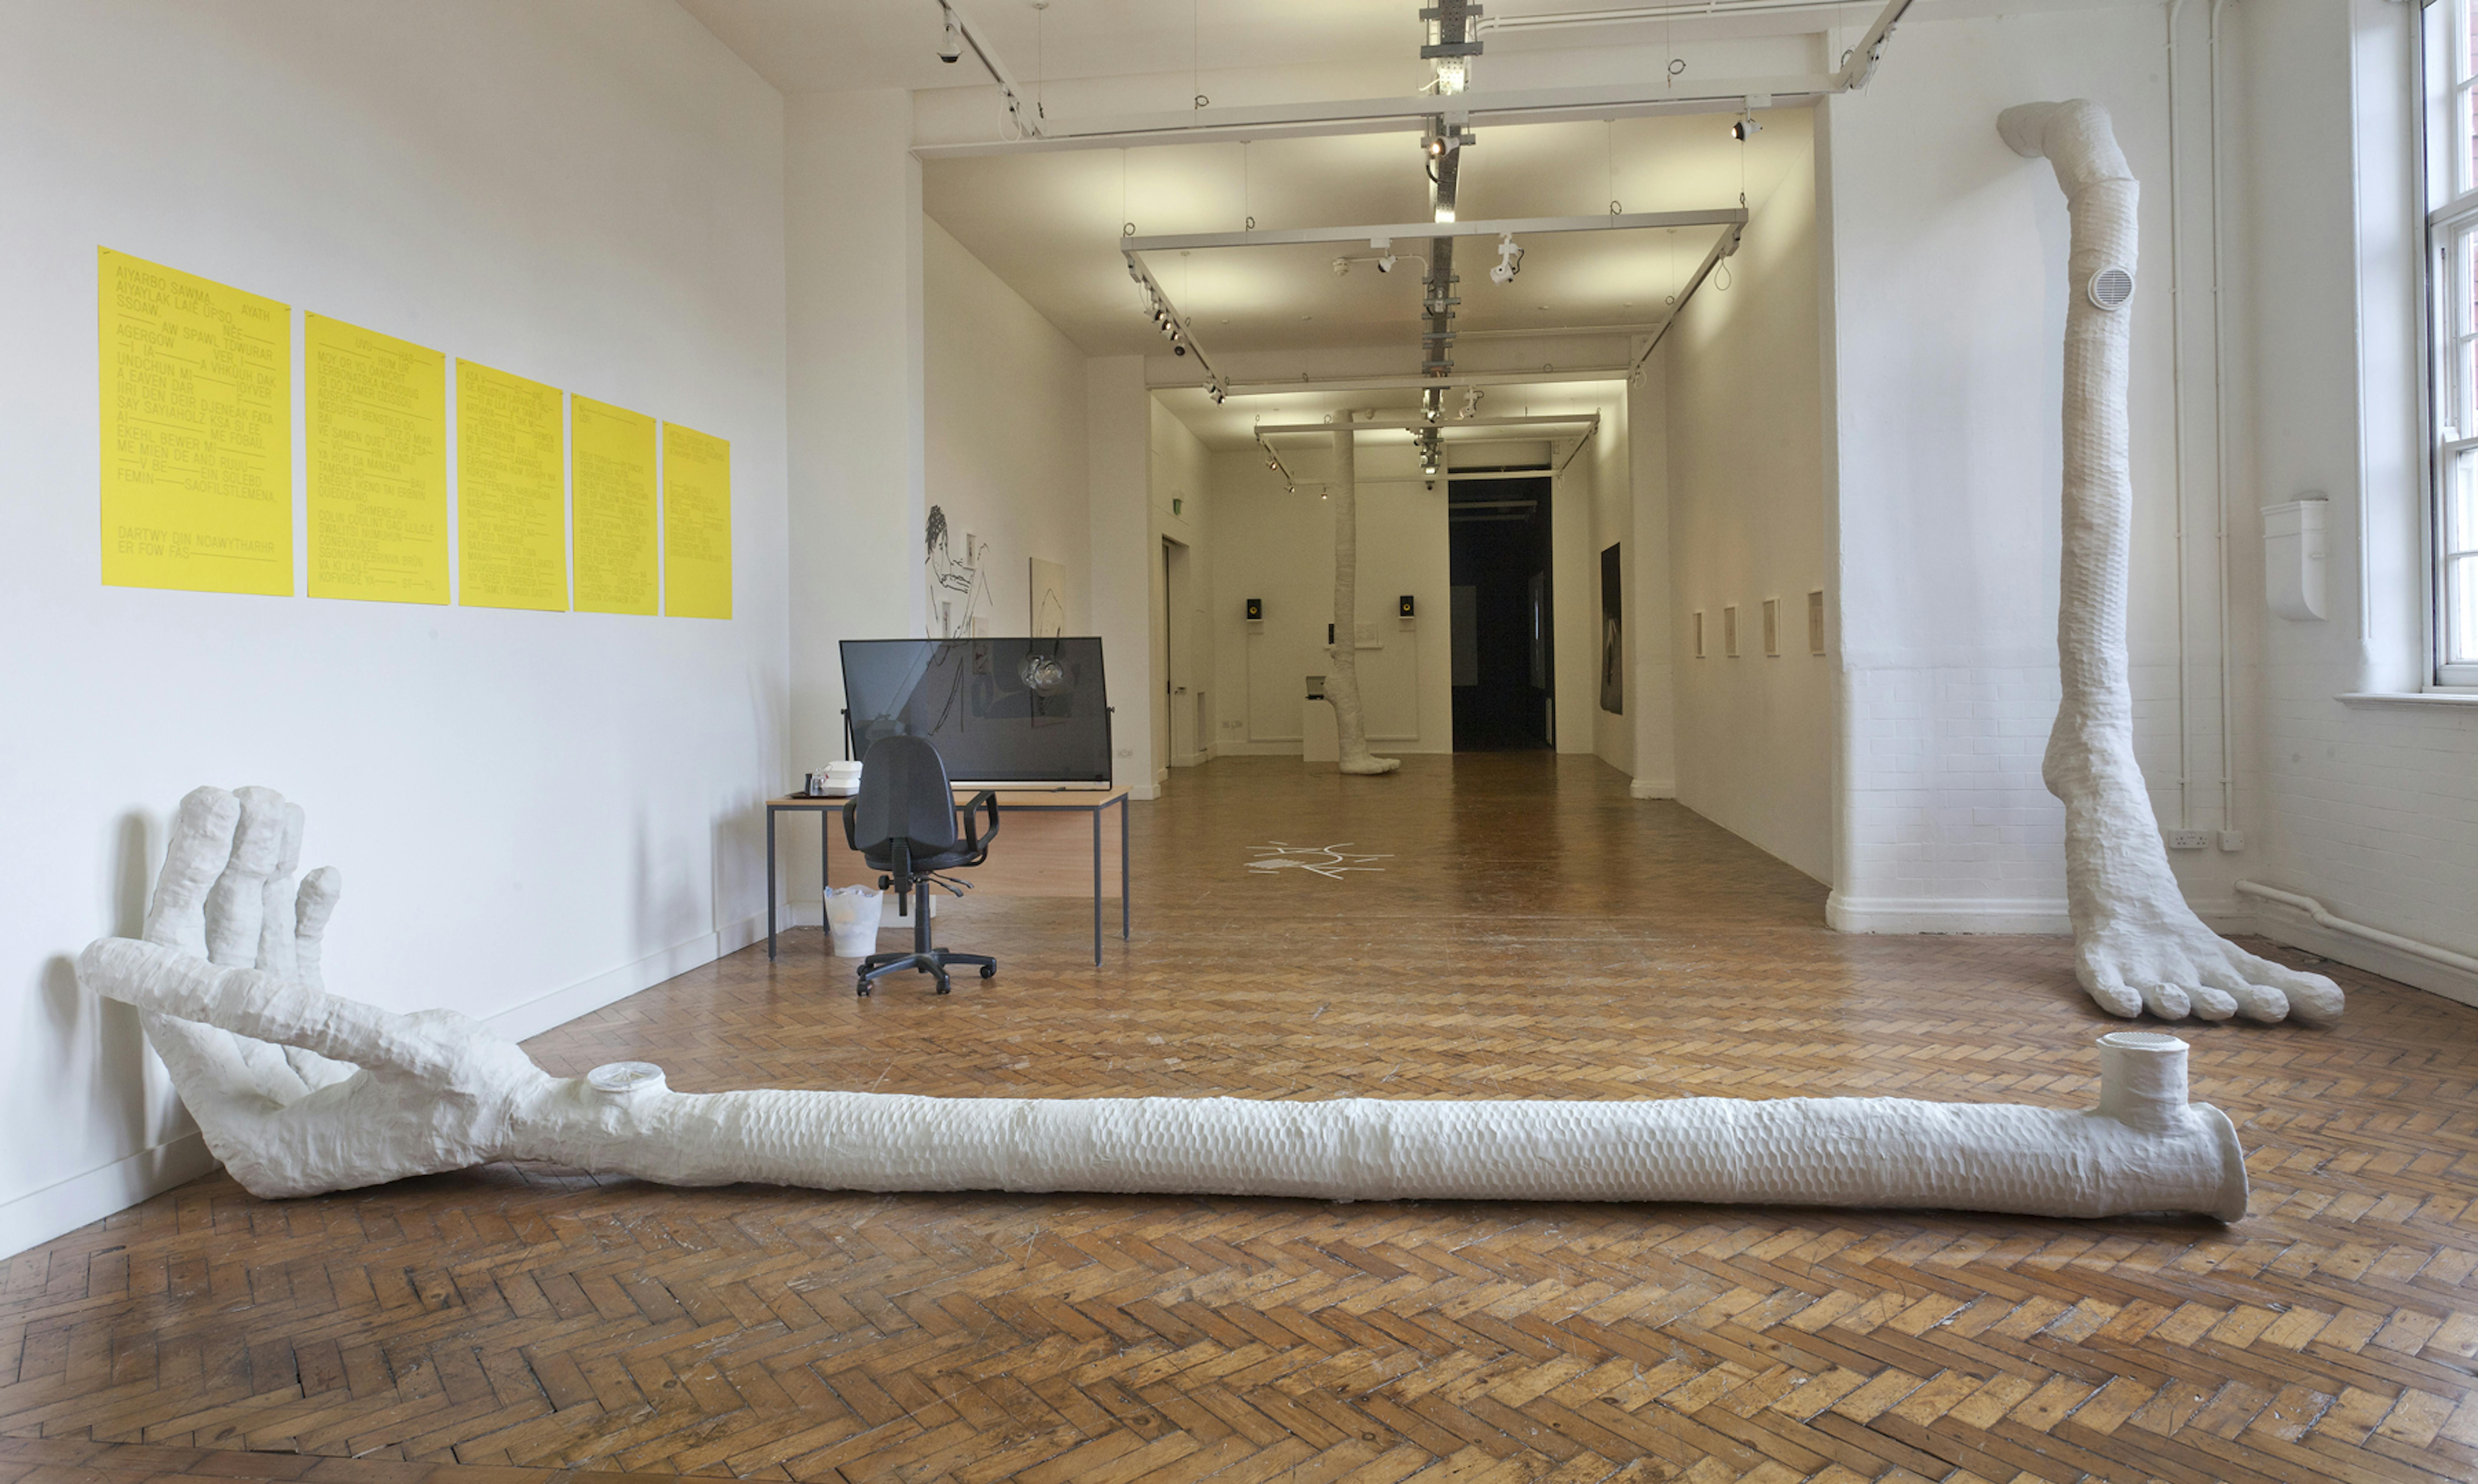 A large white hand made from plaster lies on the floor and a large white foot made in plaster appears from the wall. They frame a series of yellow posters with lettering on it. The yellow posters form a type of enigmatic poetry with fragmented words. 